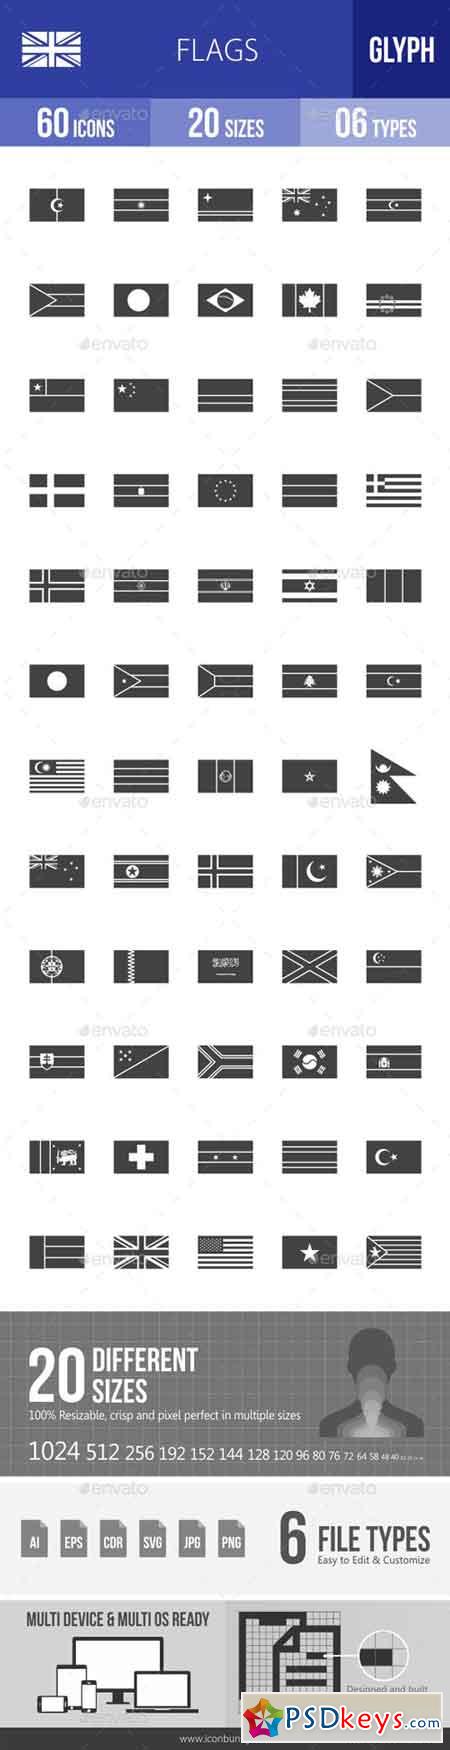 Flags Glyph Icons 18210000